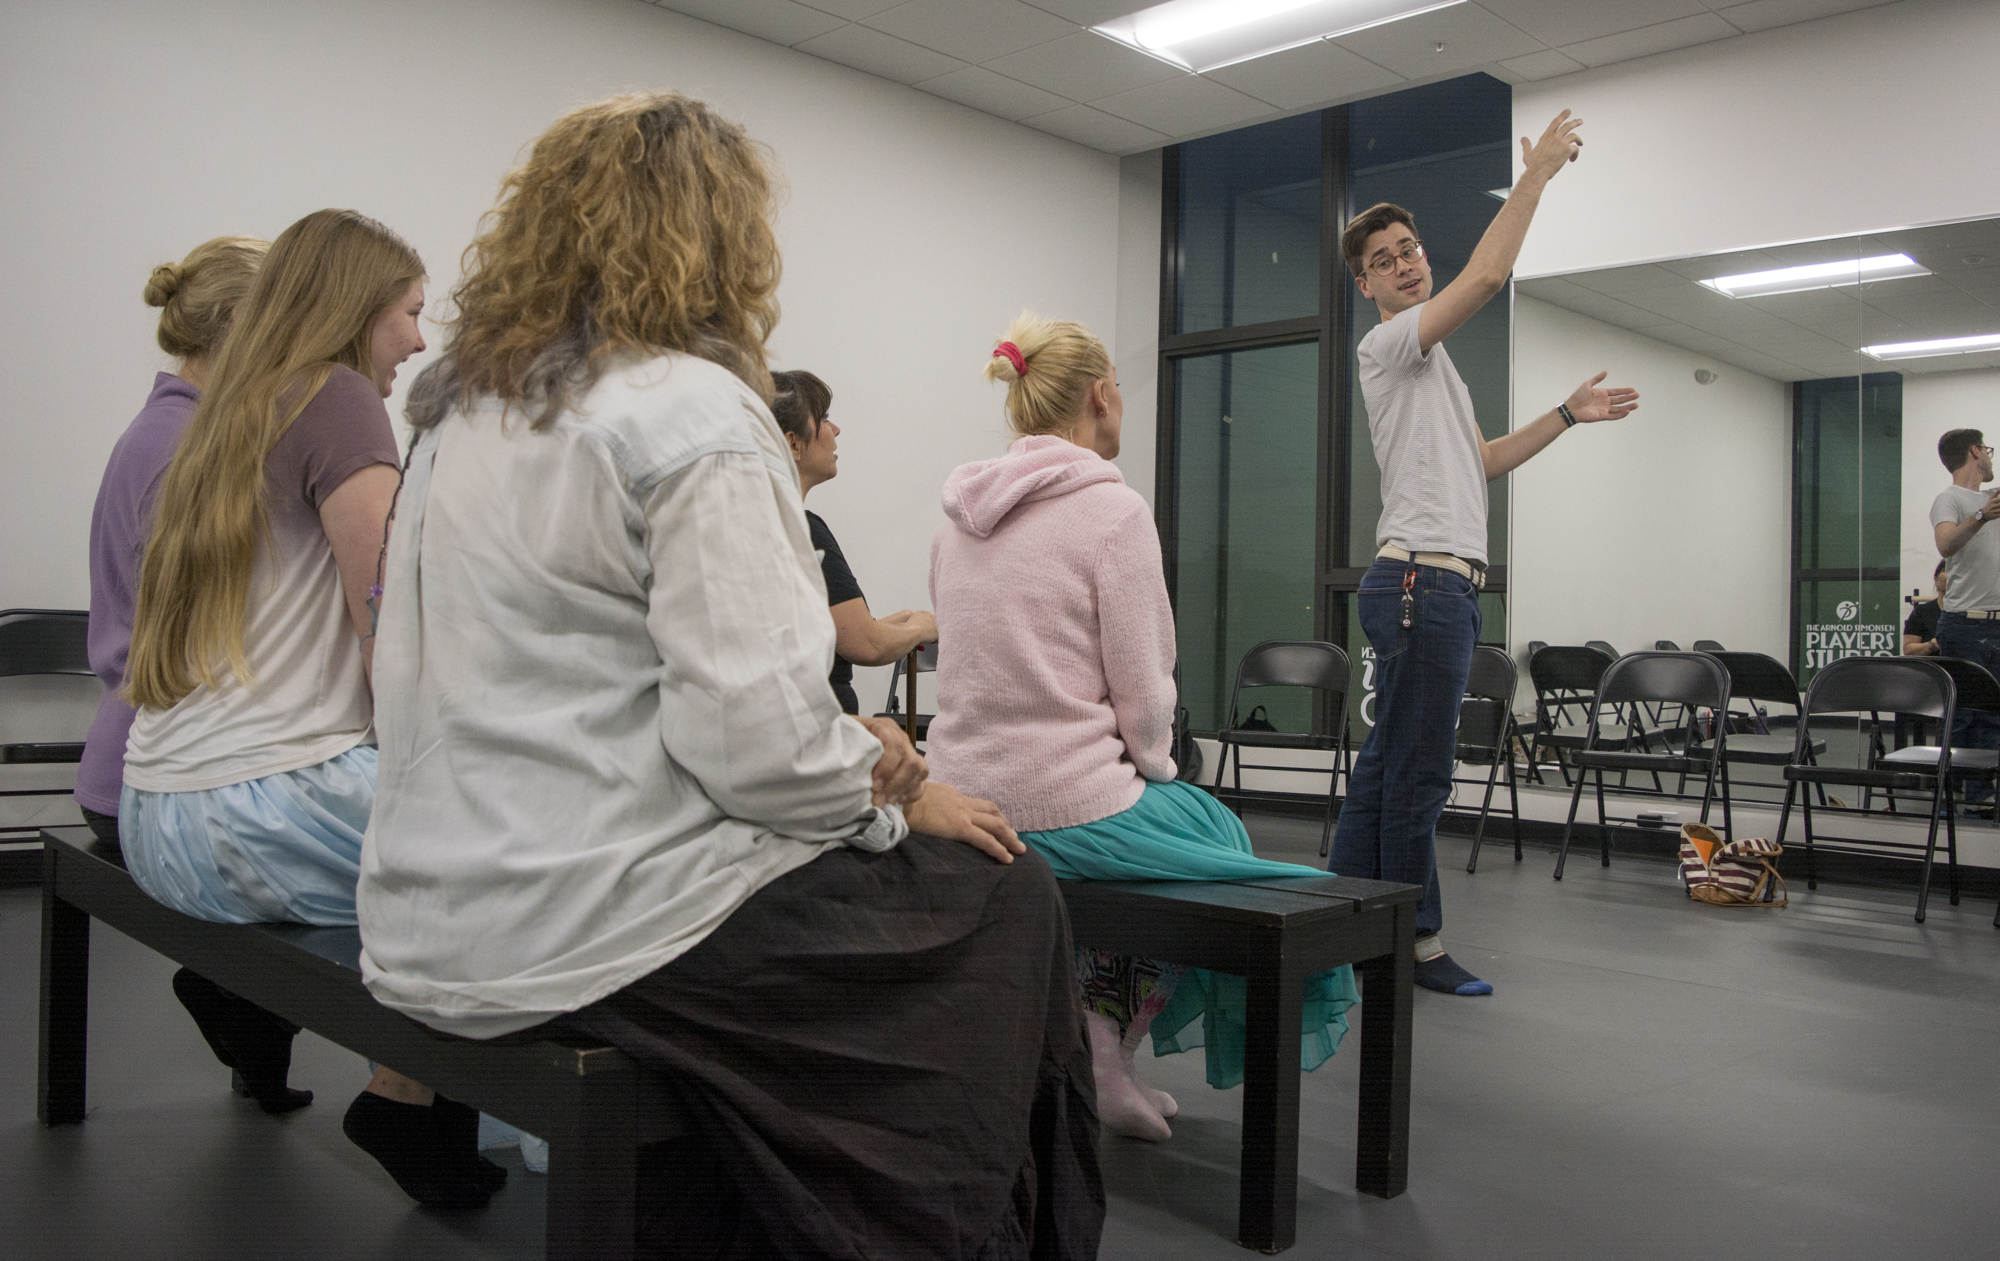 Anthony Spall rehearses with the rest of the cast at The Arnold Simonsen Players Studio.